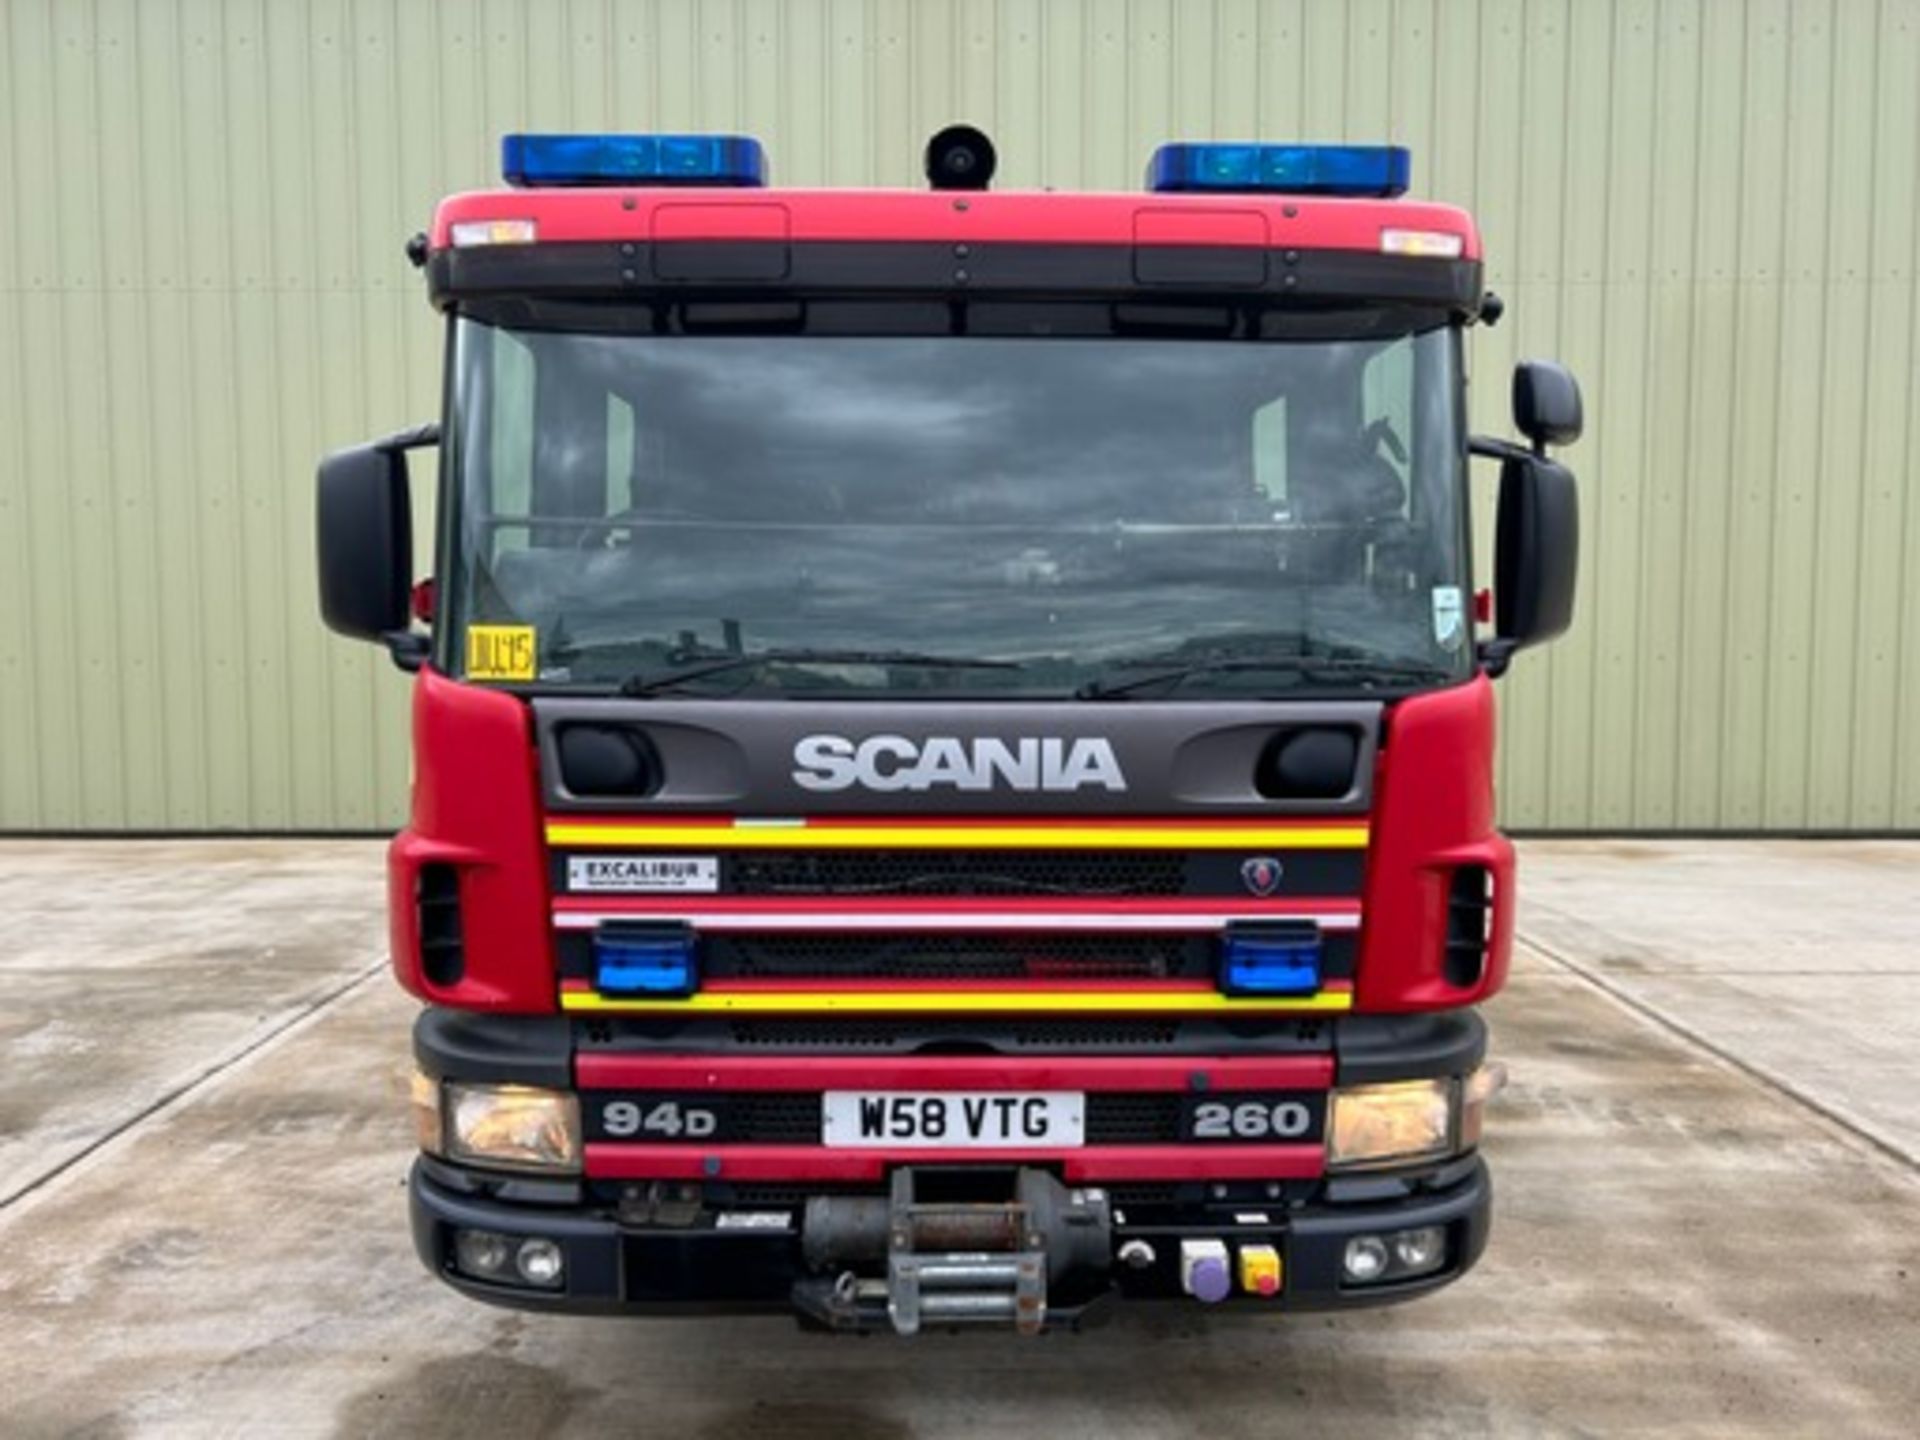 Scania Excalibur 94D 260 Fire Appliance - Image 5 of 26